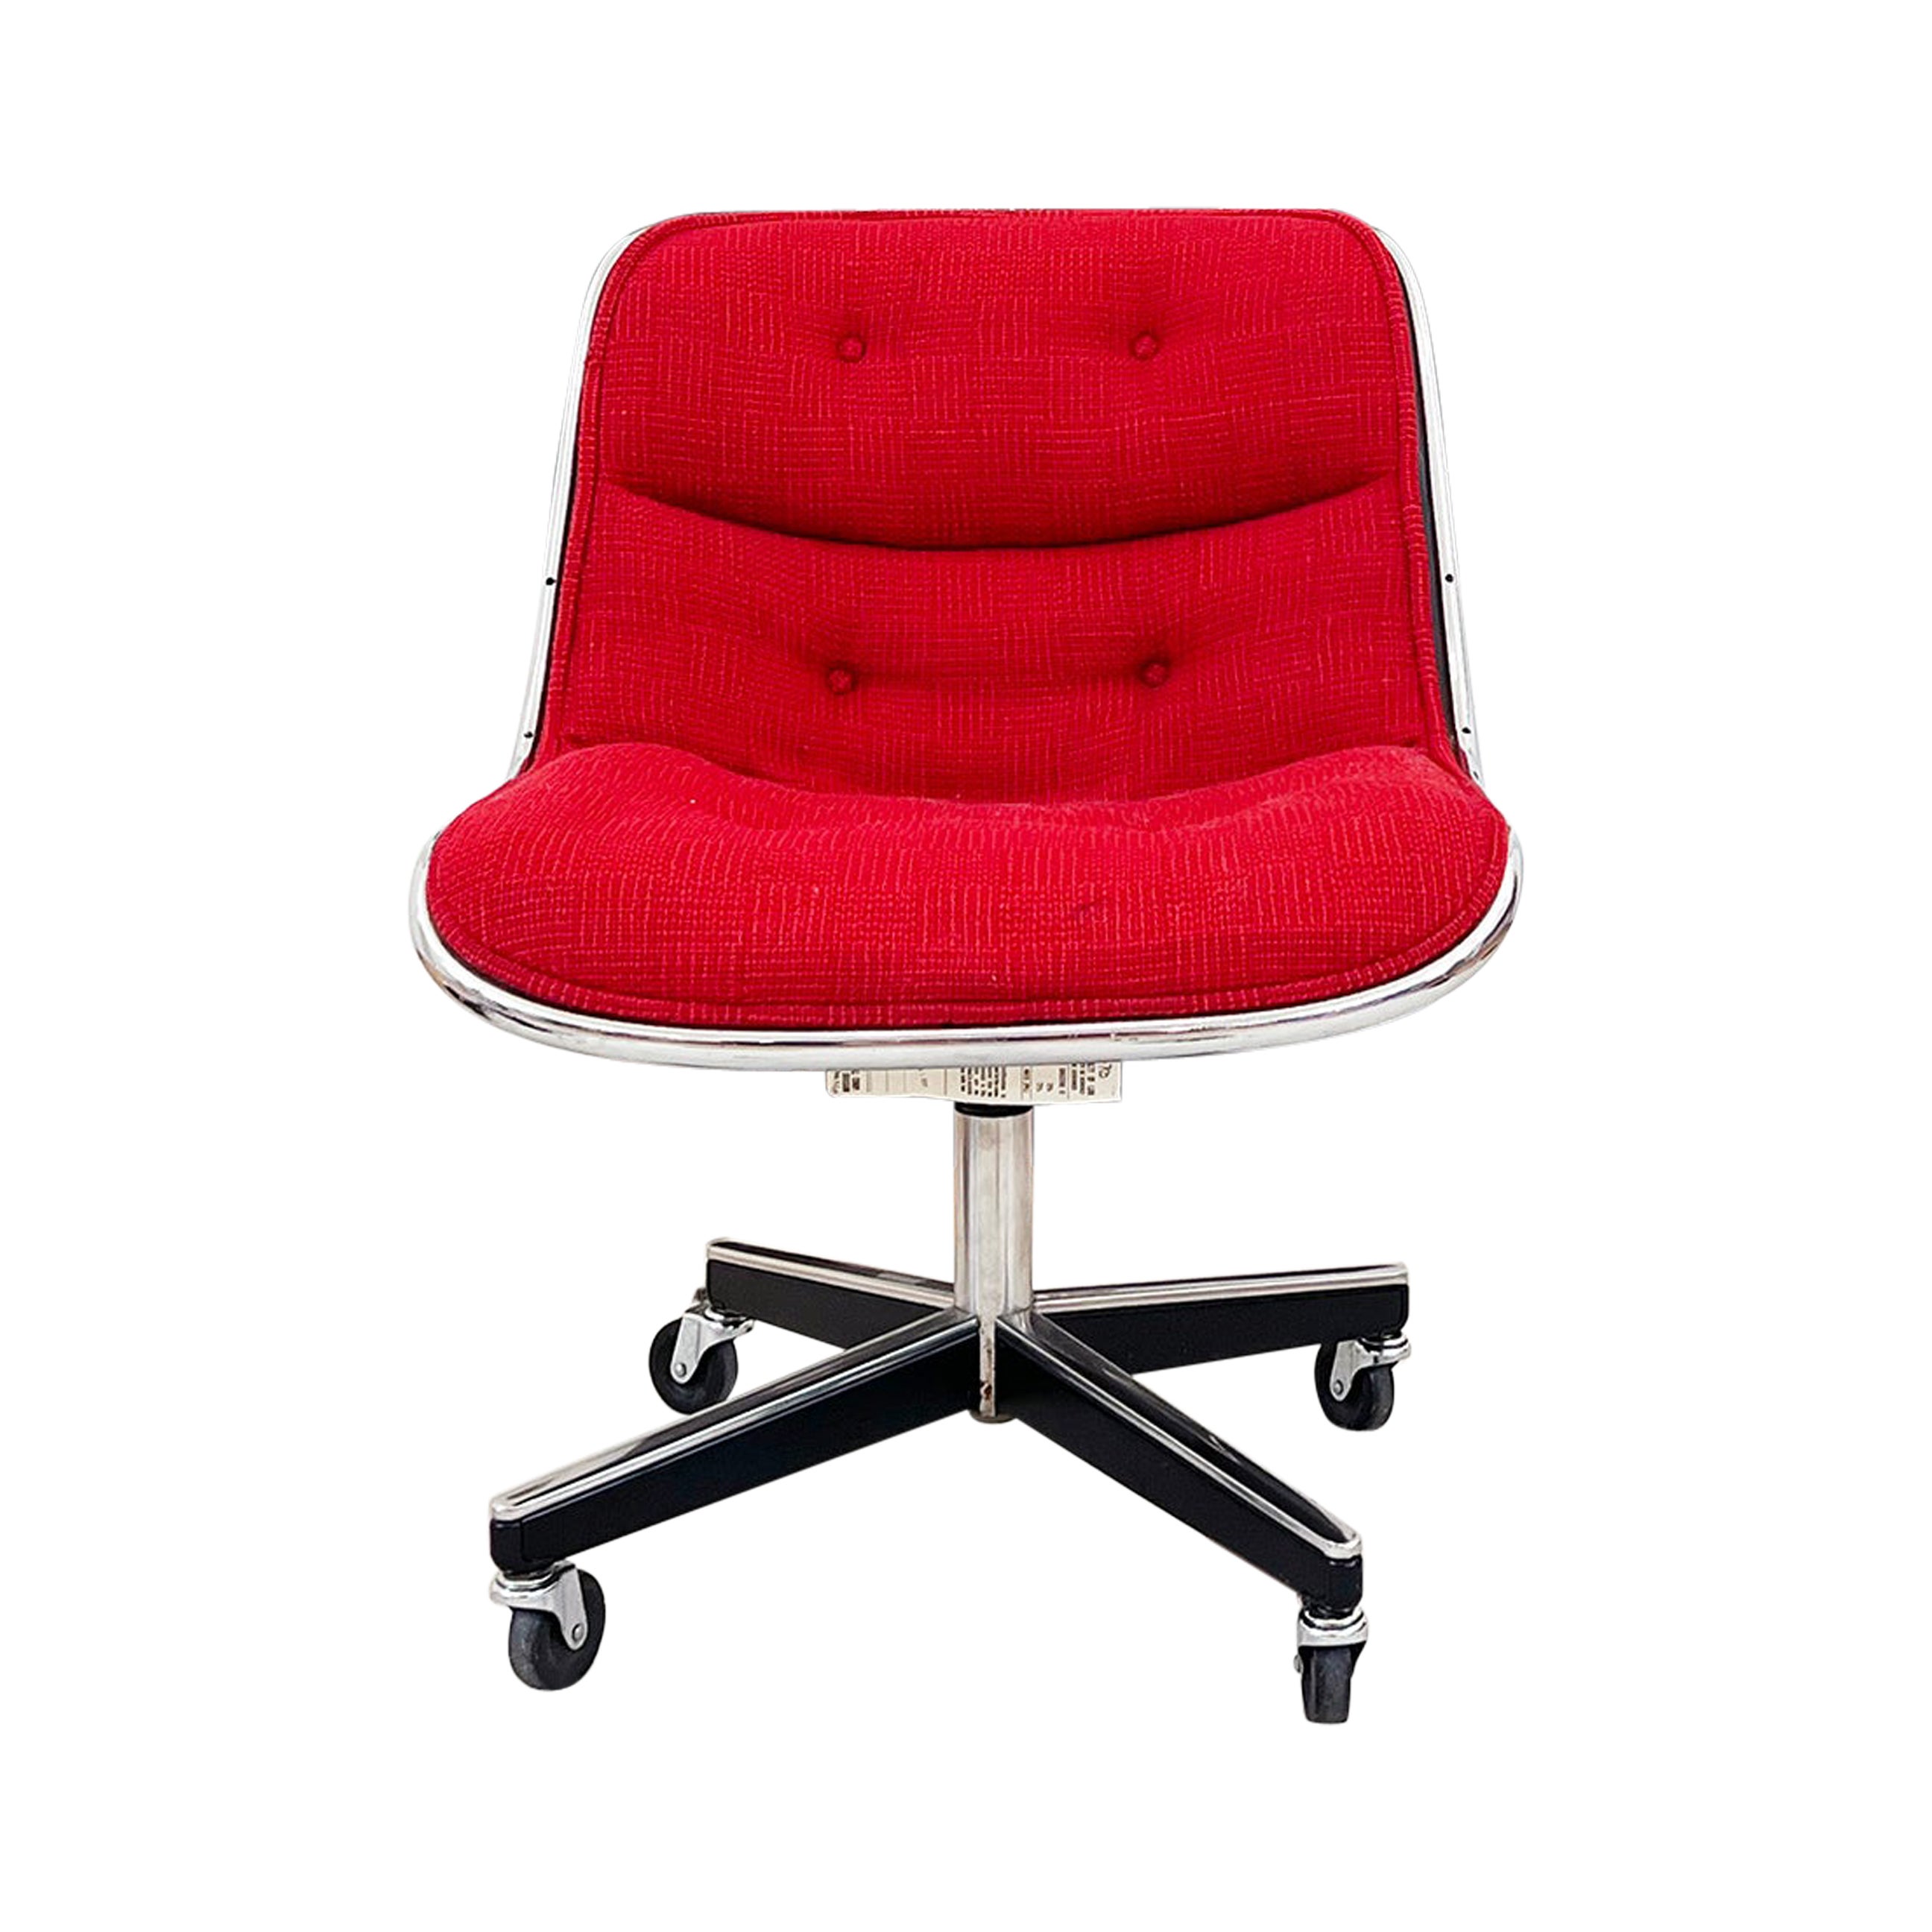 1970 Knoll Executive Chrome +  Orig. Vtg. Knoll Red Textile Leather Office Chair For Sale